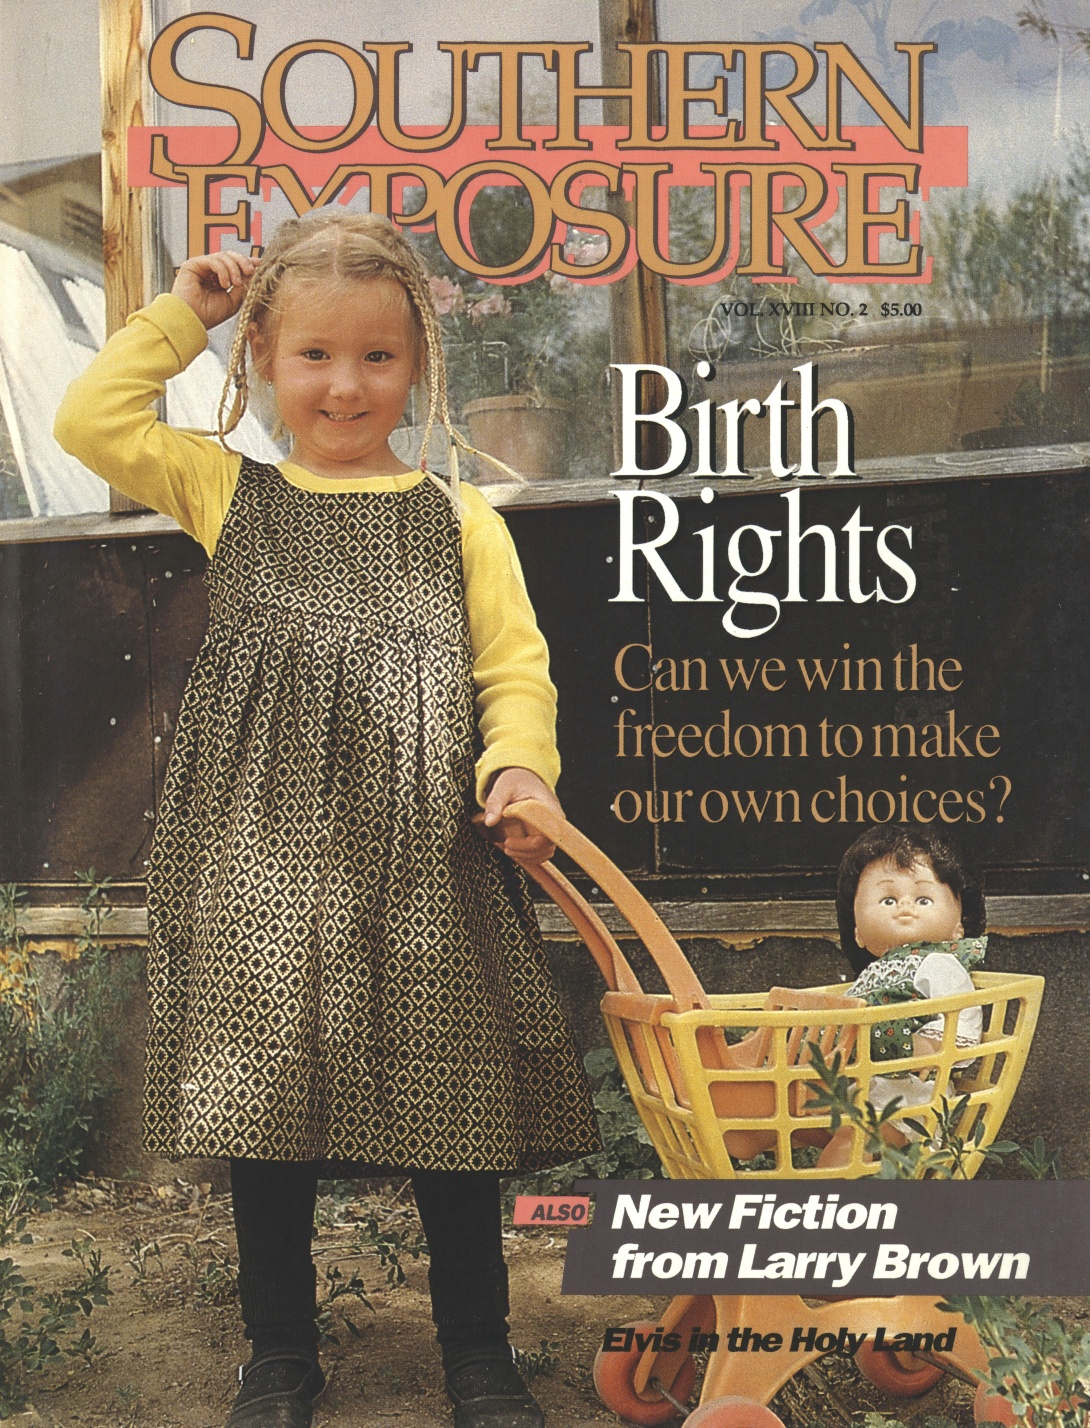 Magazine cover with photo of young girl pulling small shopping cart with baby, text reads "Birth Rights"